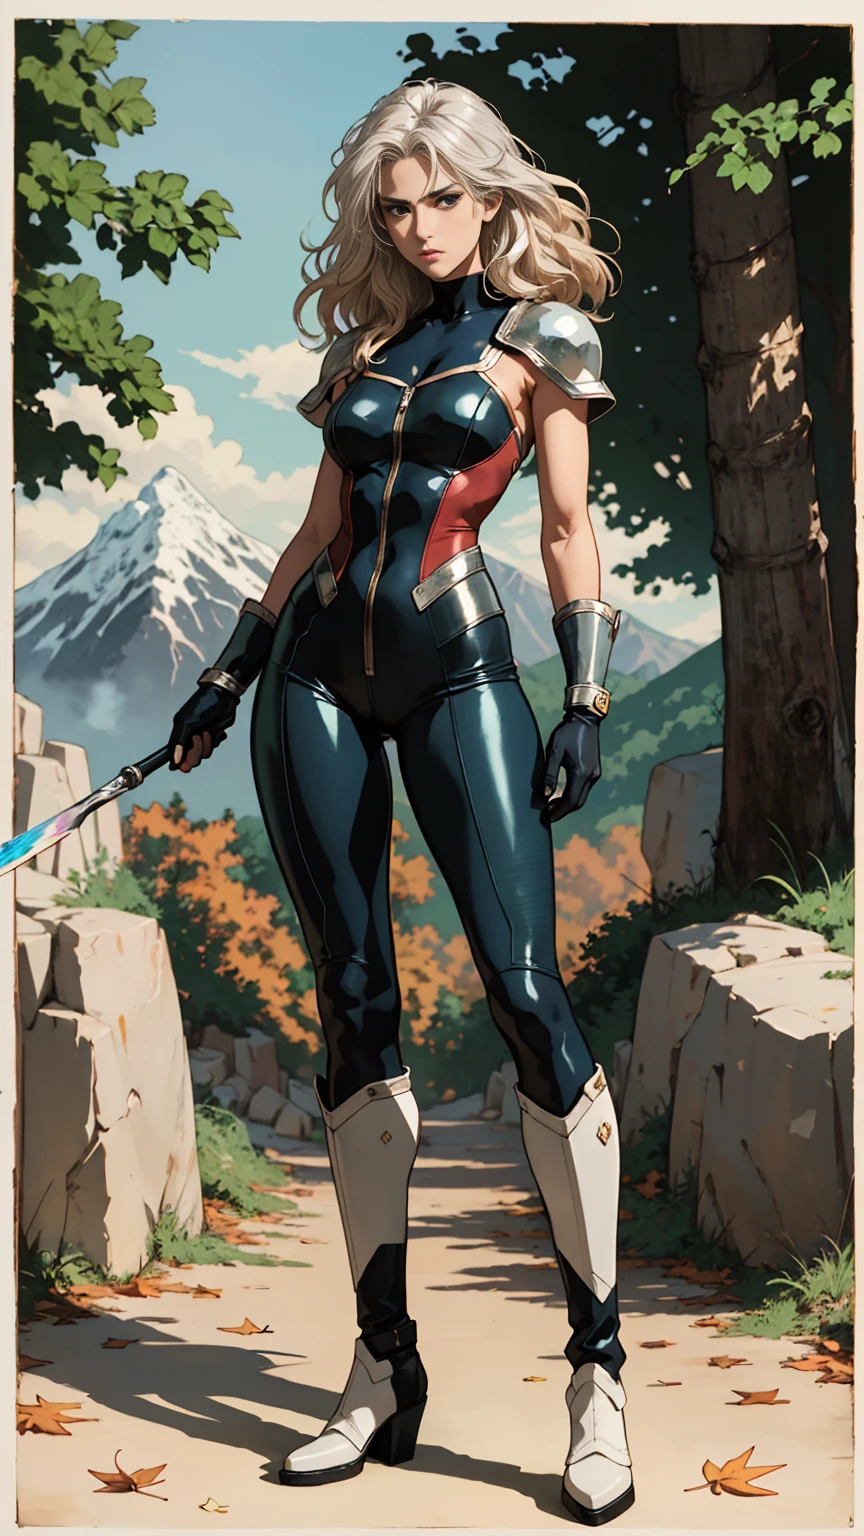 (((full body photo))),A middle-aged beautiful woman, long platinum-blond hair, neatly combed hair, a square face, a serious expression, sharp eyes, tall figure, a dark fantasy-realistic style bodysuit, short sleeve, a silver-white chestplate, gloves with metal accessories, three metal blades extending from the gloves, tight-fitting pants that match the bodysuit, silver-white metal shin guards, boots, the background is a mountain forest at night, with falling leaves, this character embodies a finely crafted fantasy-realistic style assassin in anime style, characterized by an exquisite and mature manga illustration art style, high definition, best quality, highres, ultra-detailed, ultra-fine painting, extremely delicate, professional, anatomically correct, symmetrical face, extremely detailed eyes and face, high quality eyes, creativity, RAW photo, UHD, 8k, Natural light, cinematic lighting, masterpiece-anatomy-perfect, masterpiece:1.5